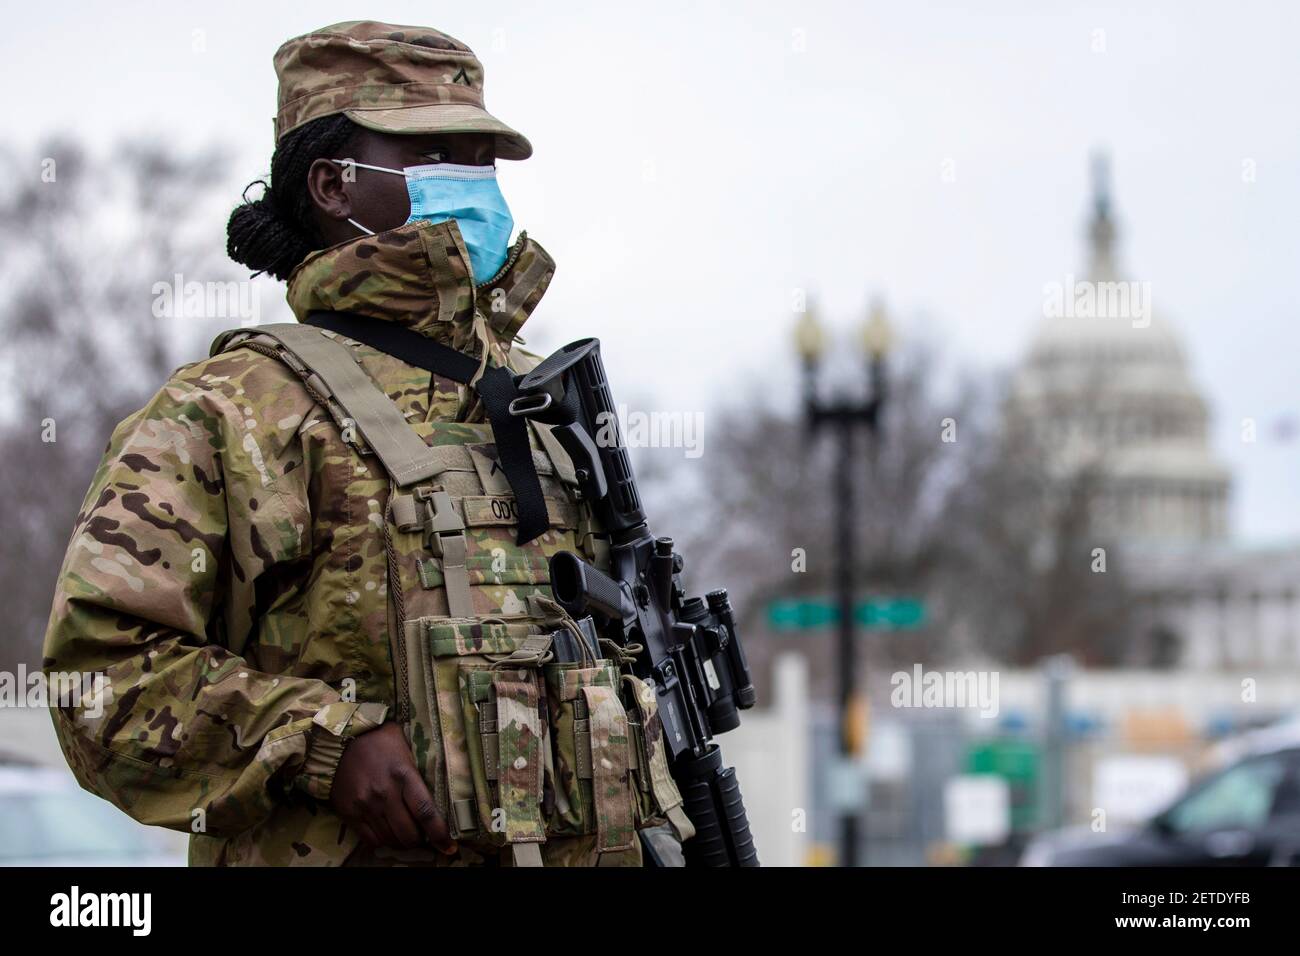 Washington, United States. 01st Mar, 2021. U.S. Army Pvt. Precious Odoom, with the New York National Guard, stands watch near the U.S. Capitol March 1, 2021 in Washington, DC The National Guard will continue supporting federal law enforcement agencies with security around the Capitol until the end of March. Credit: Planetpix/Alamy Live News Stock Photo